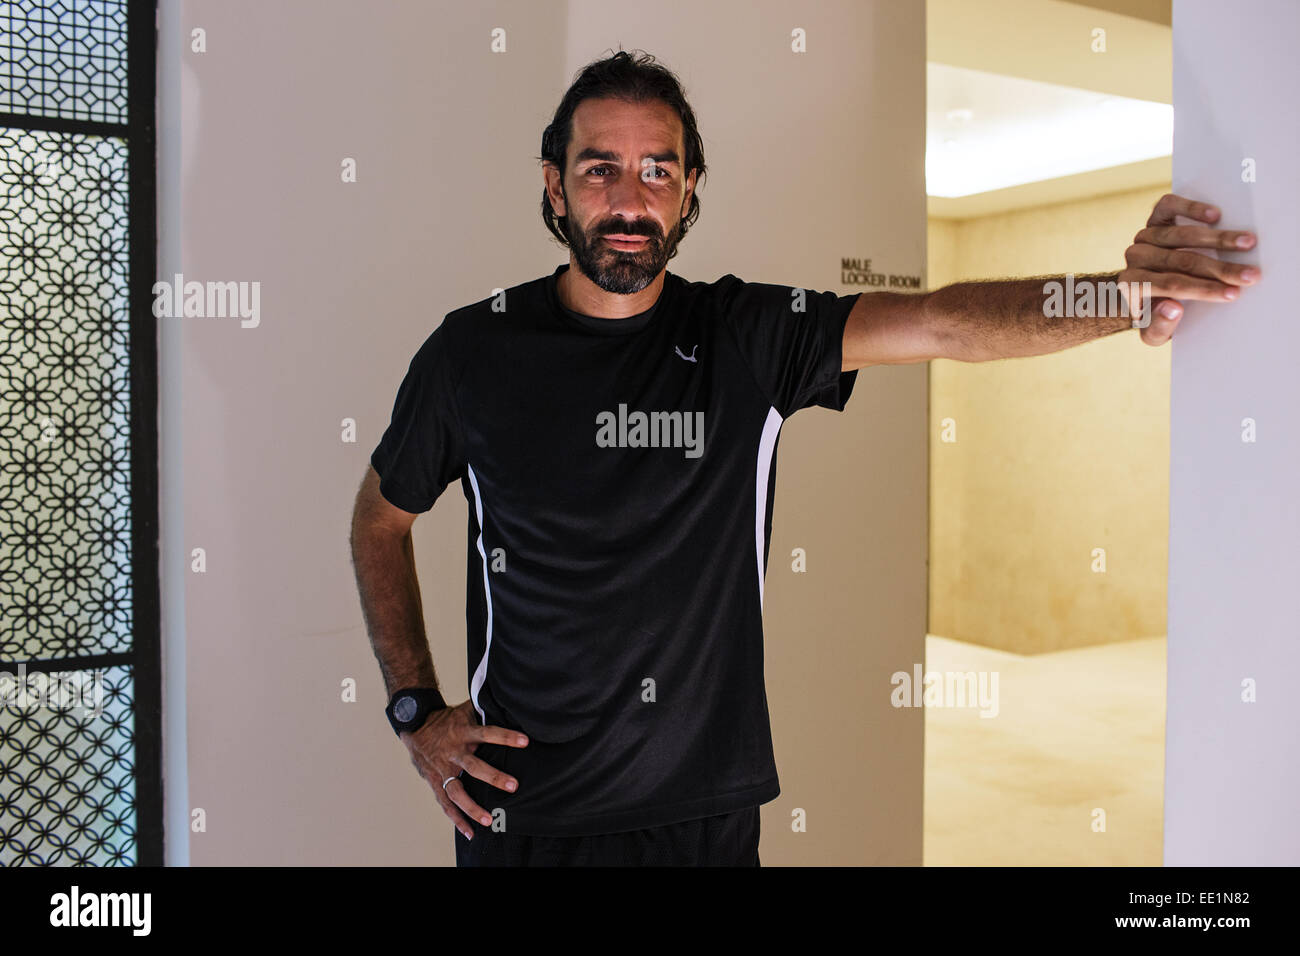 A portrait of Robert Pires - a French football player who plays for FC Goa in the Indian Super League. Goa, India, 2014 Stock Photo